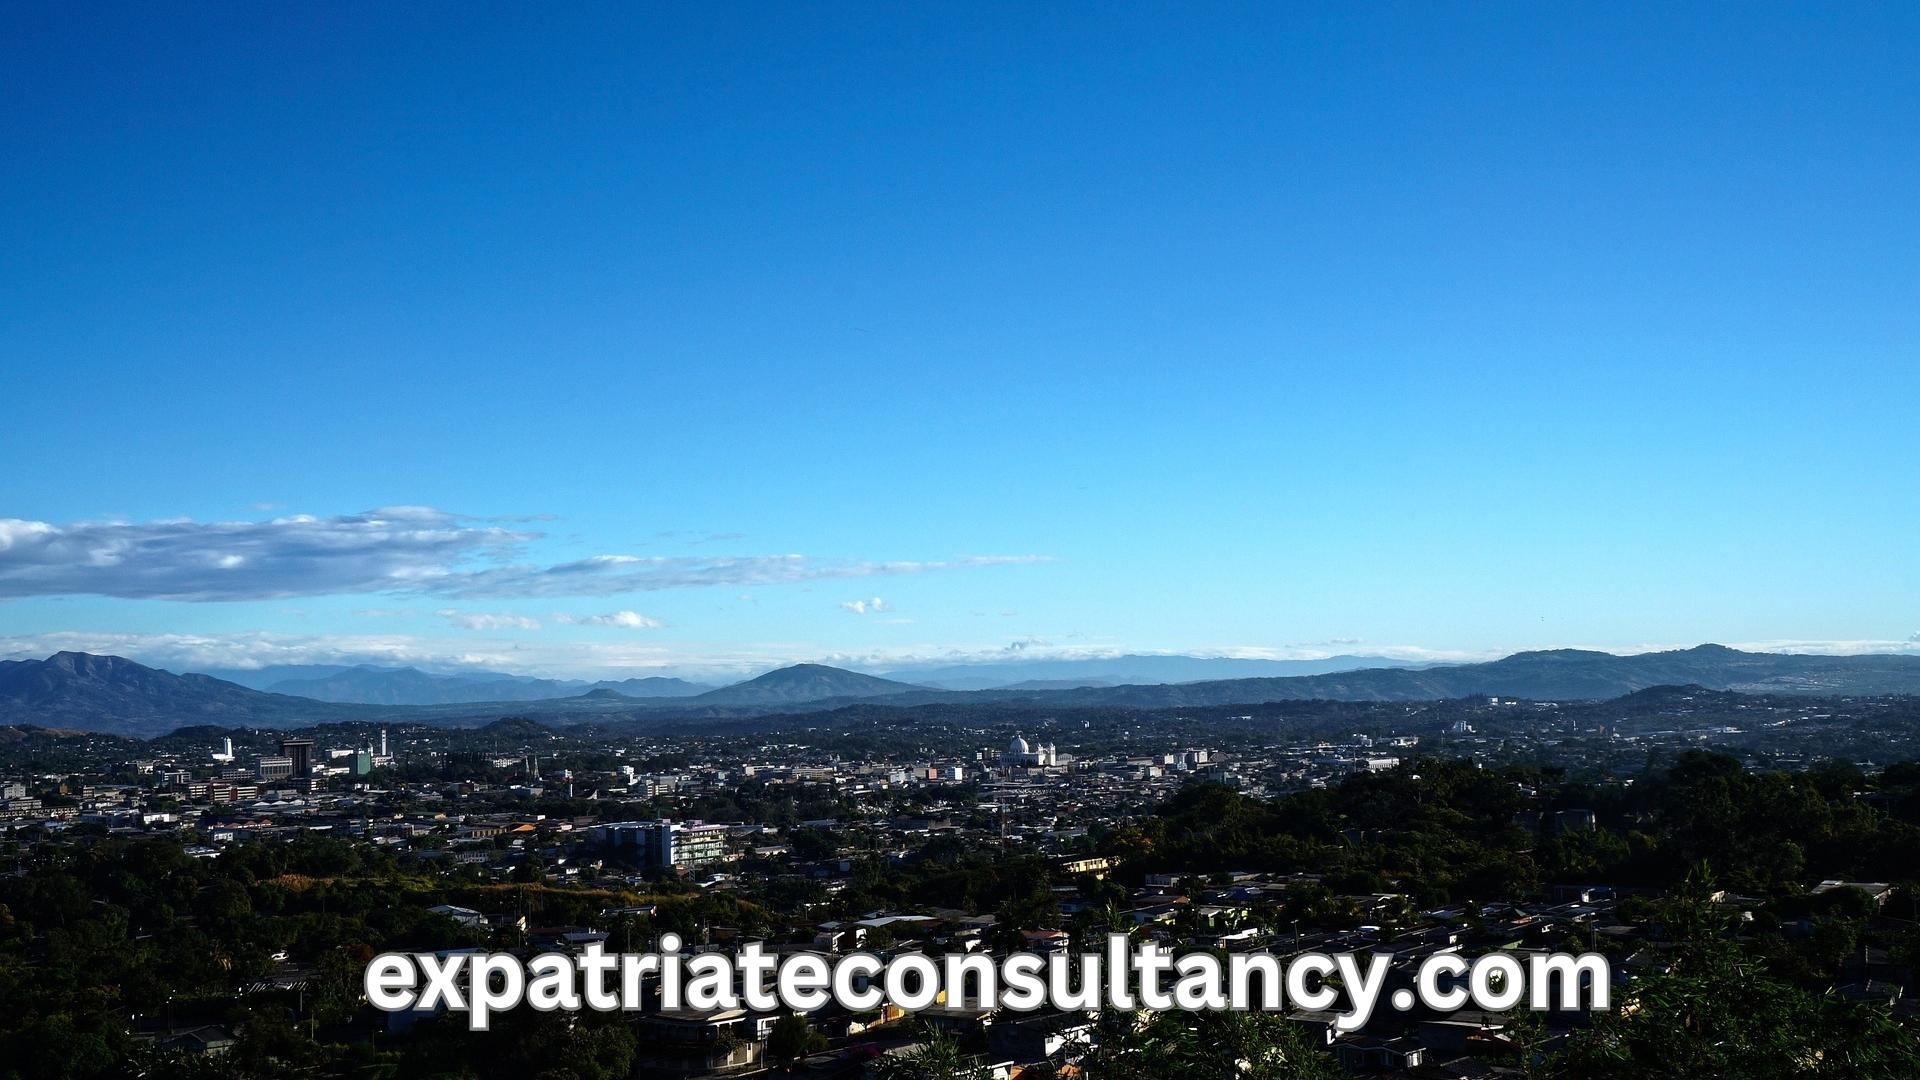 Panormic image of San Salvador, one of the best cities to retire in El Salvador.